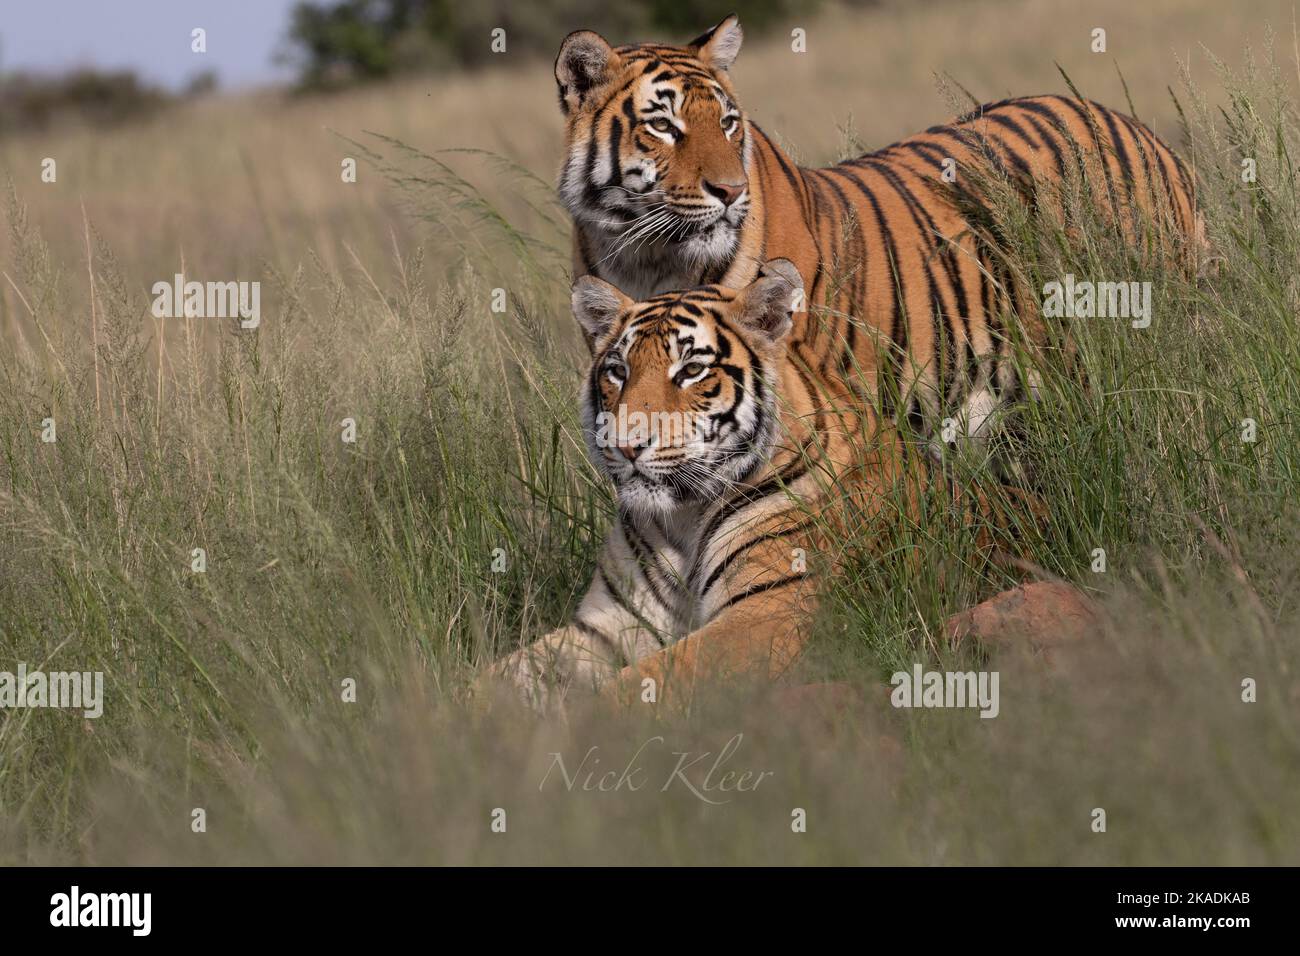 Tigers out on a hunt, photo taken on a safari Stock Photo